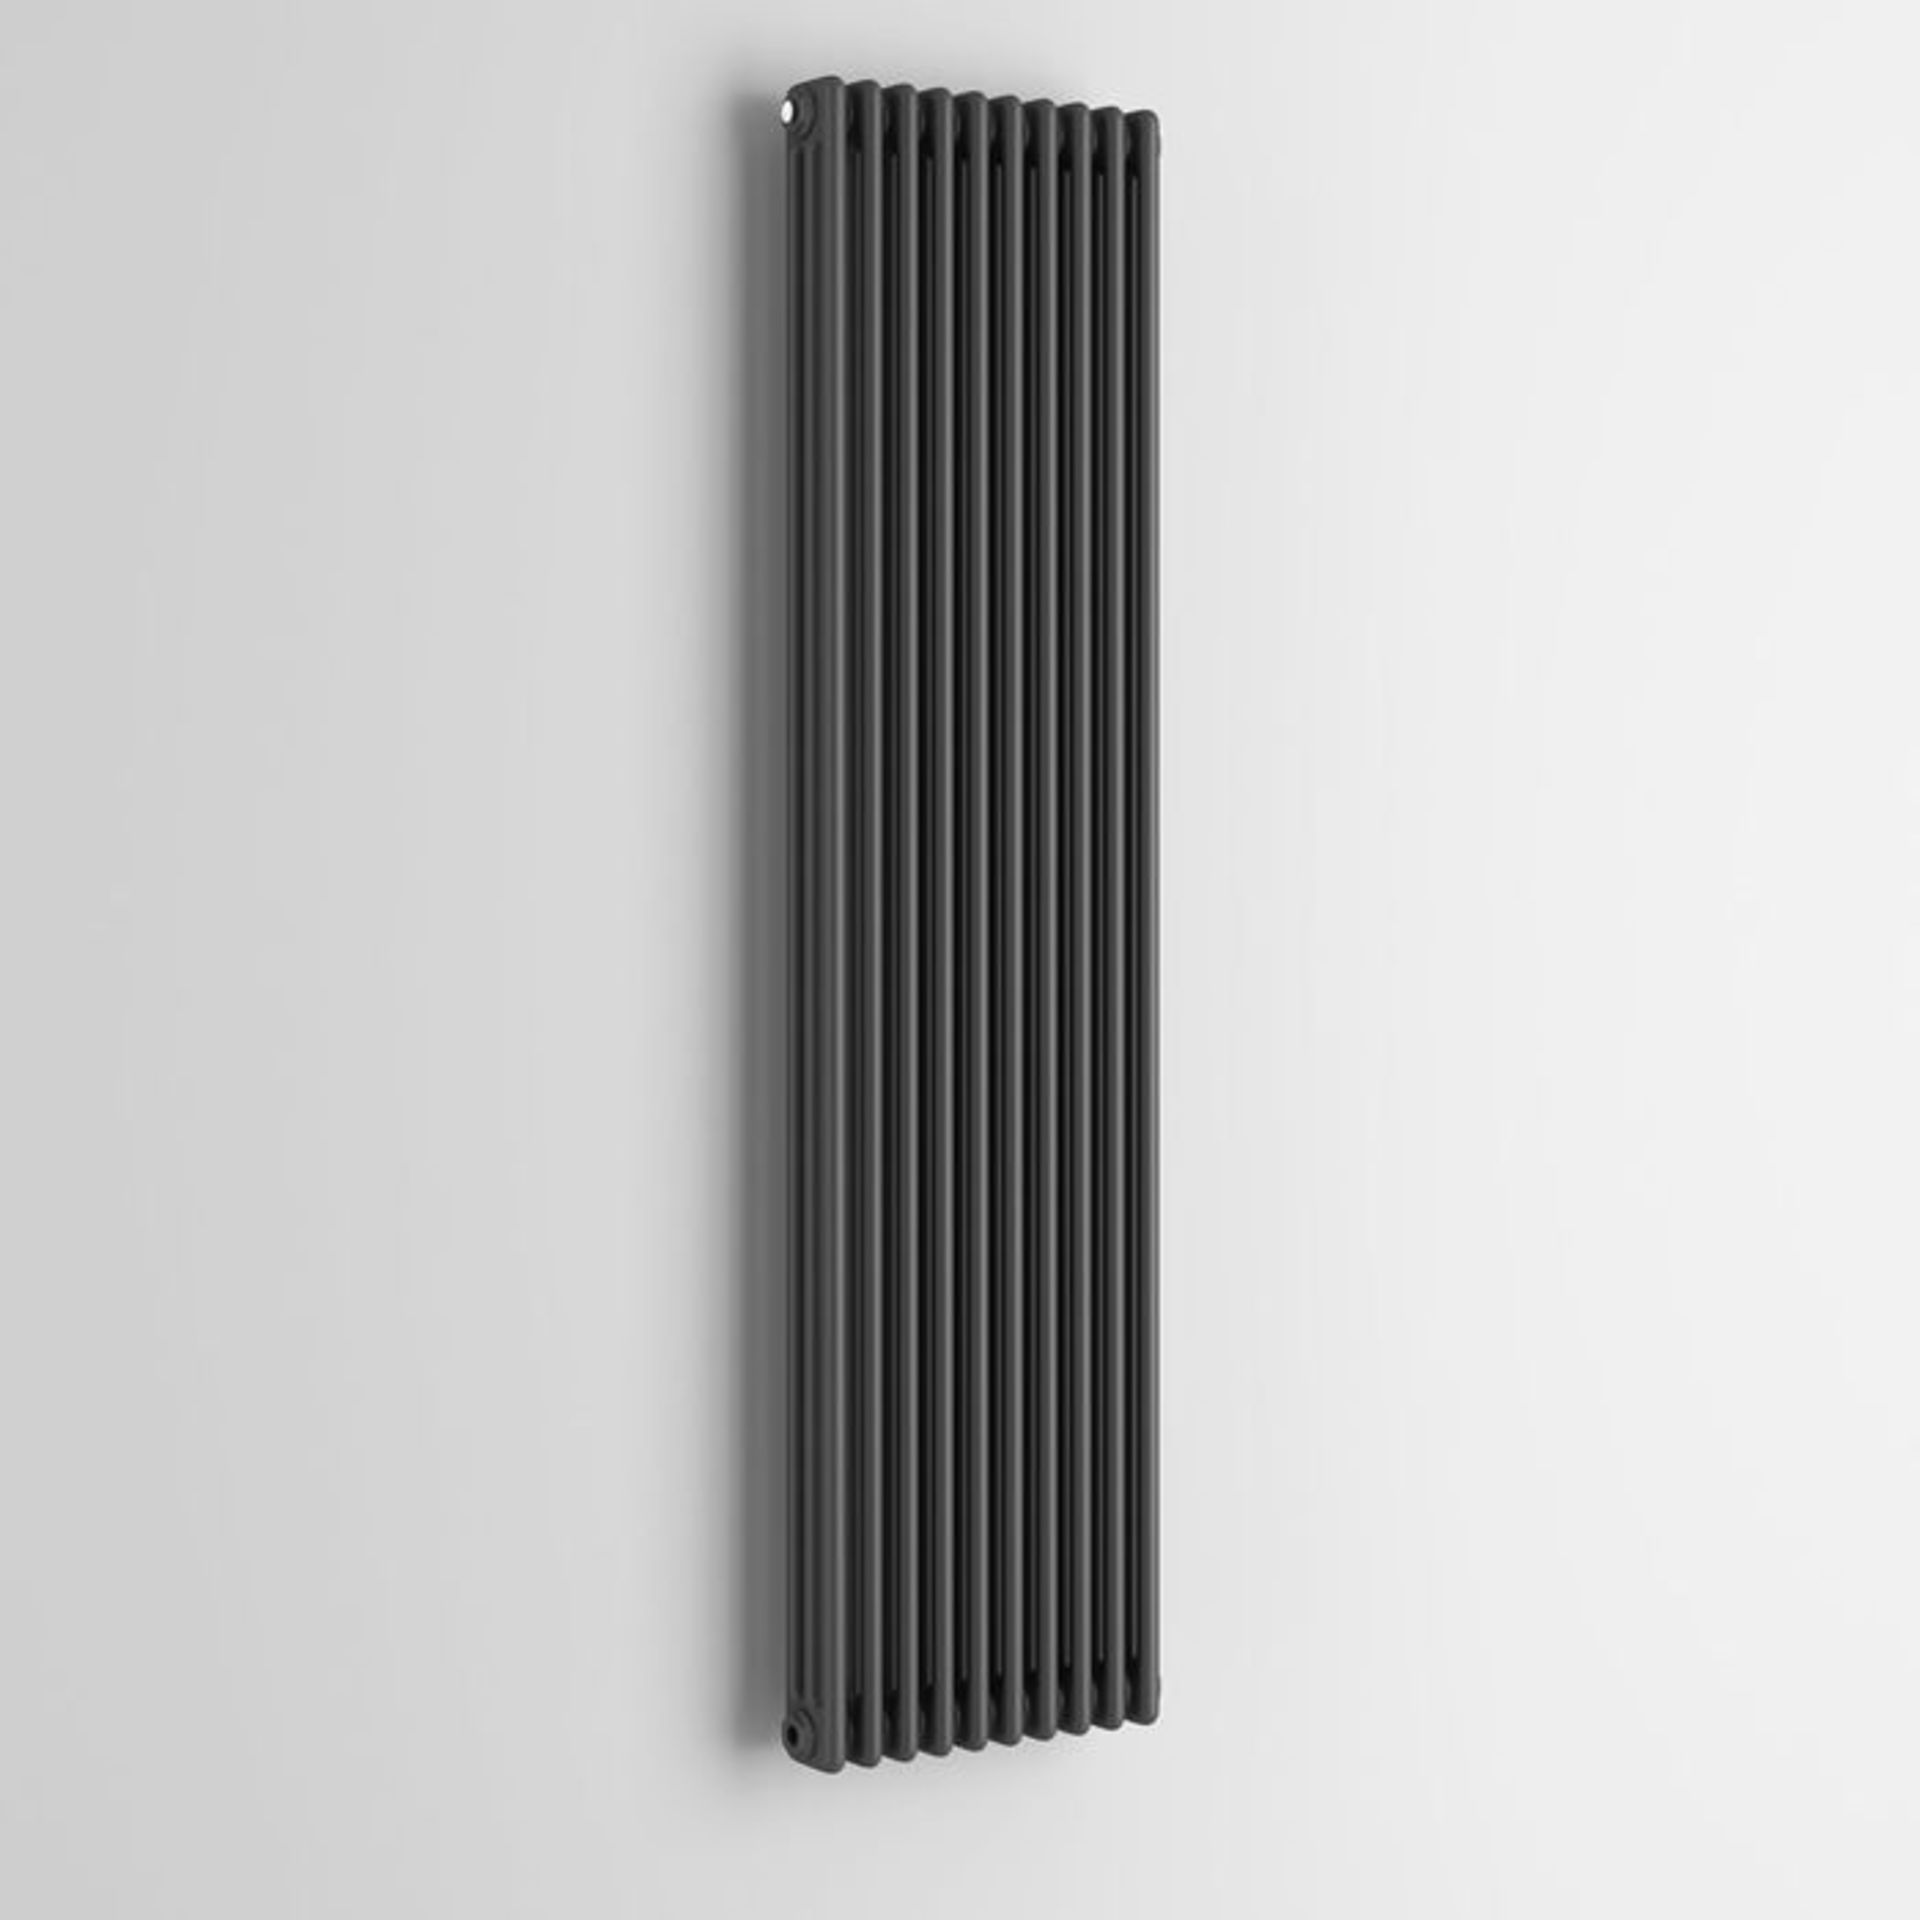 (W214) 1800x468mm Anthracite Triple Panel Vertical Colosseum Traditional Radiator. RRP £599.99. - Image 3 of 3